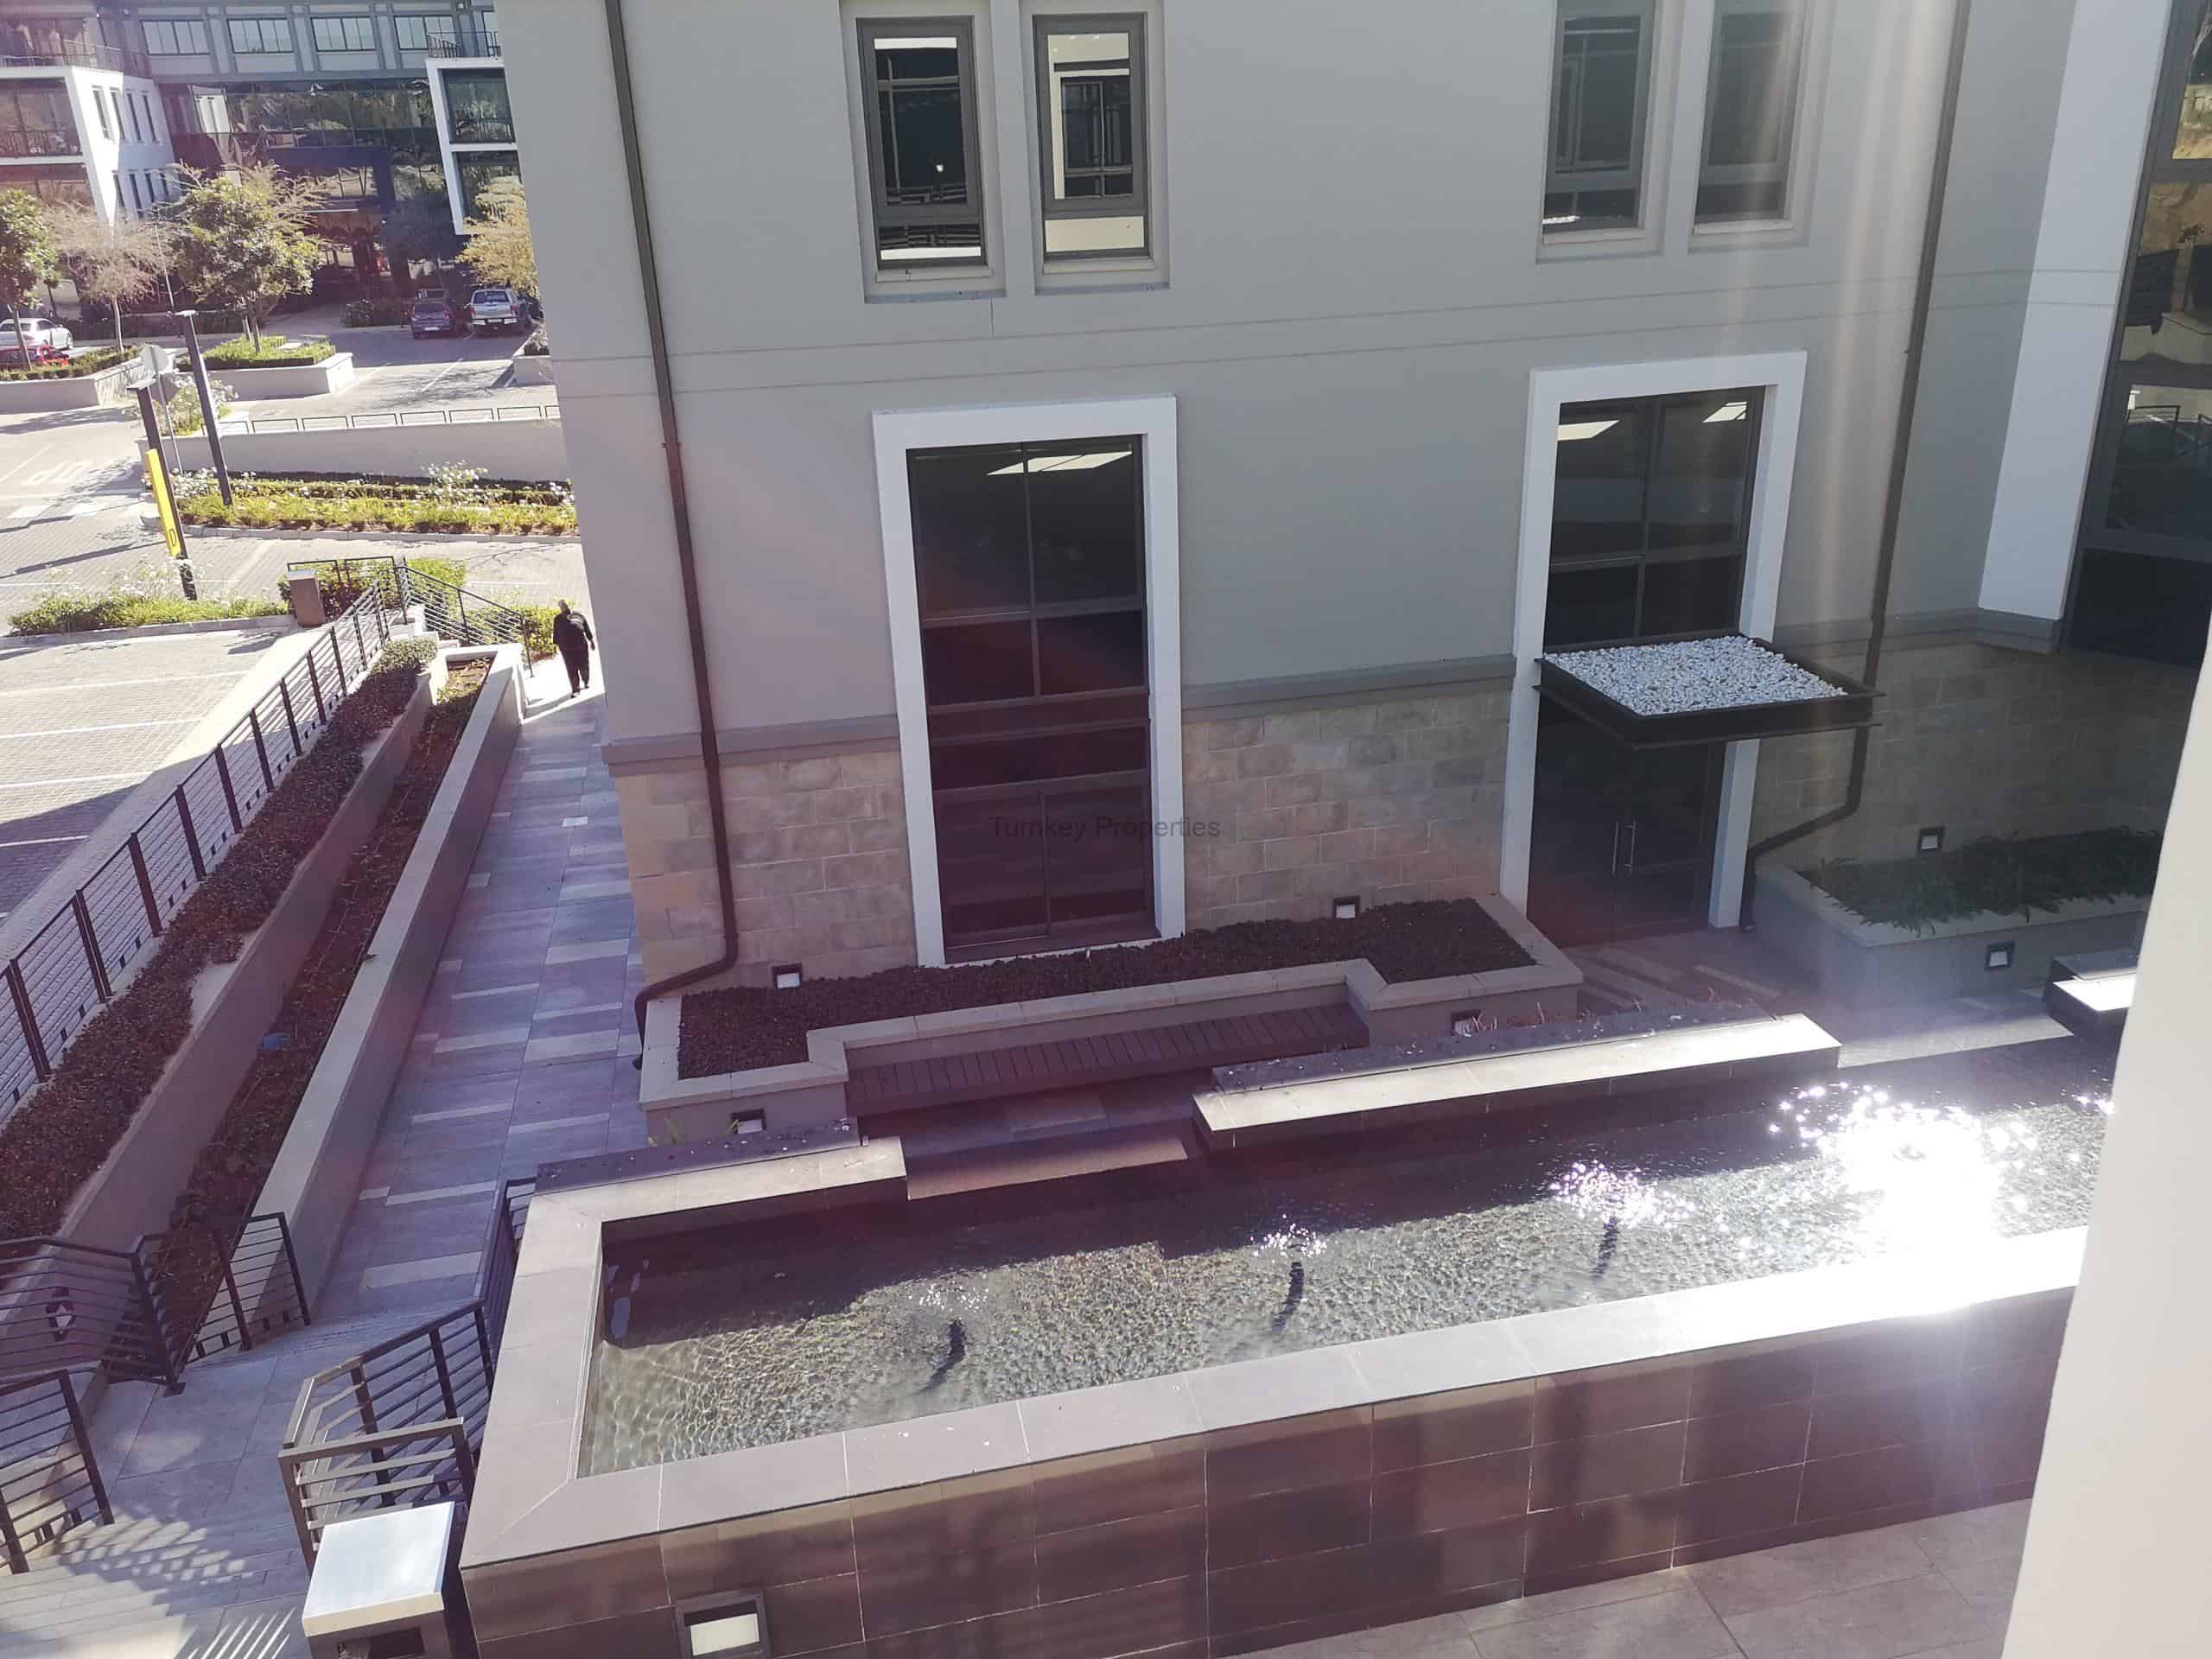 756m² Office Space To Rent Fourways Monte Circle